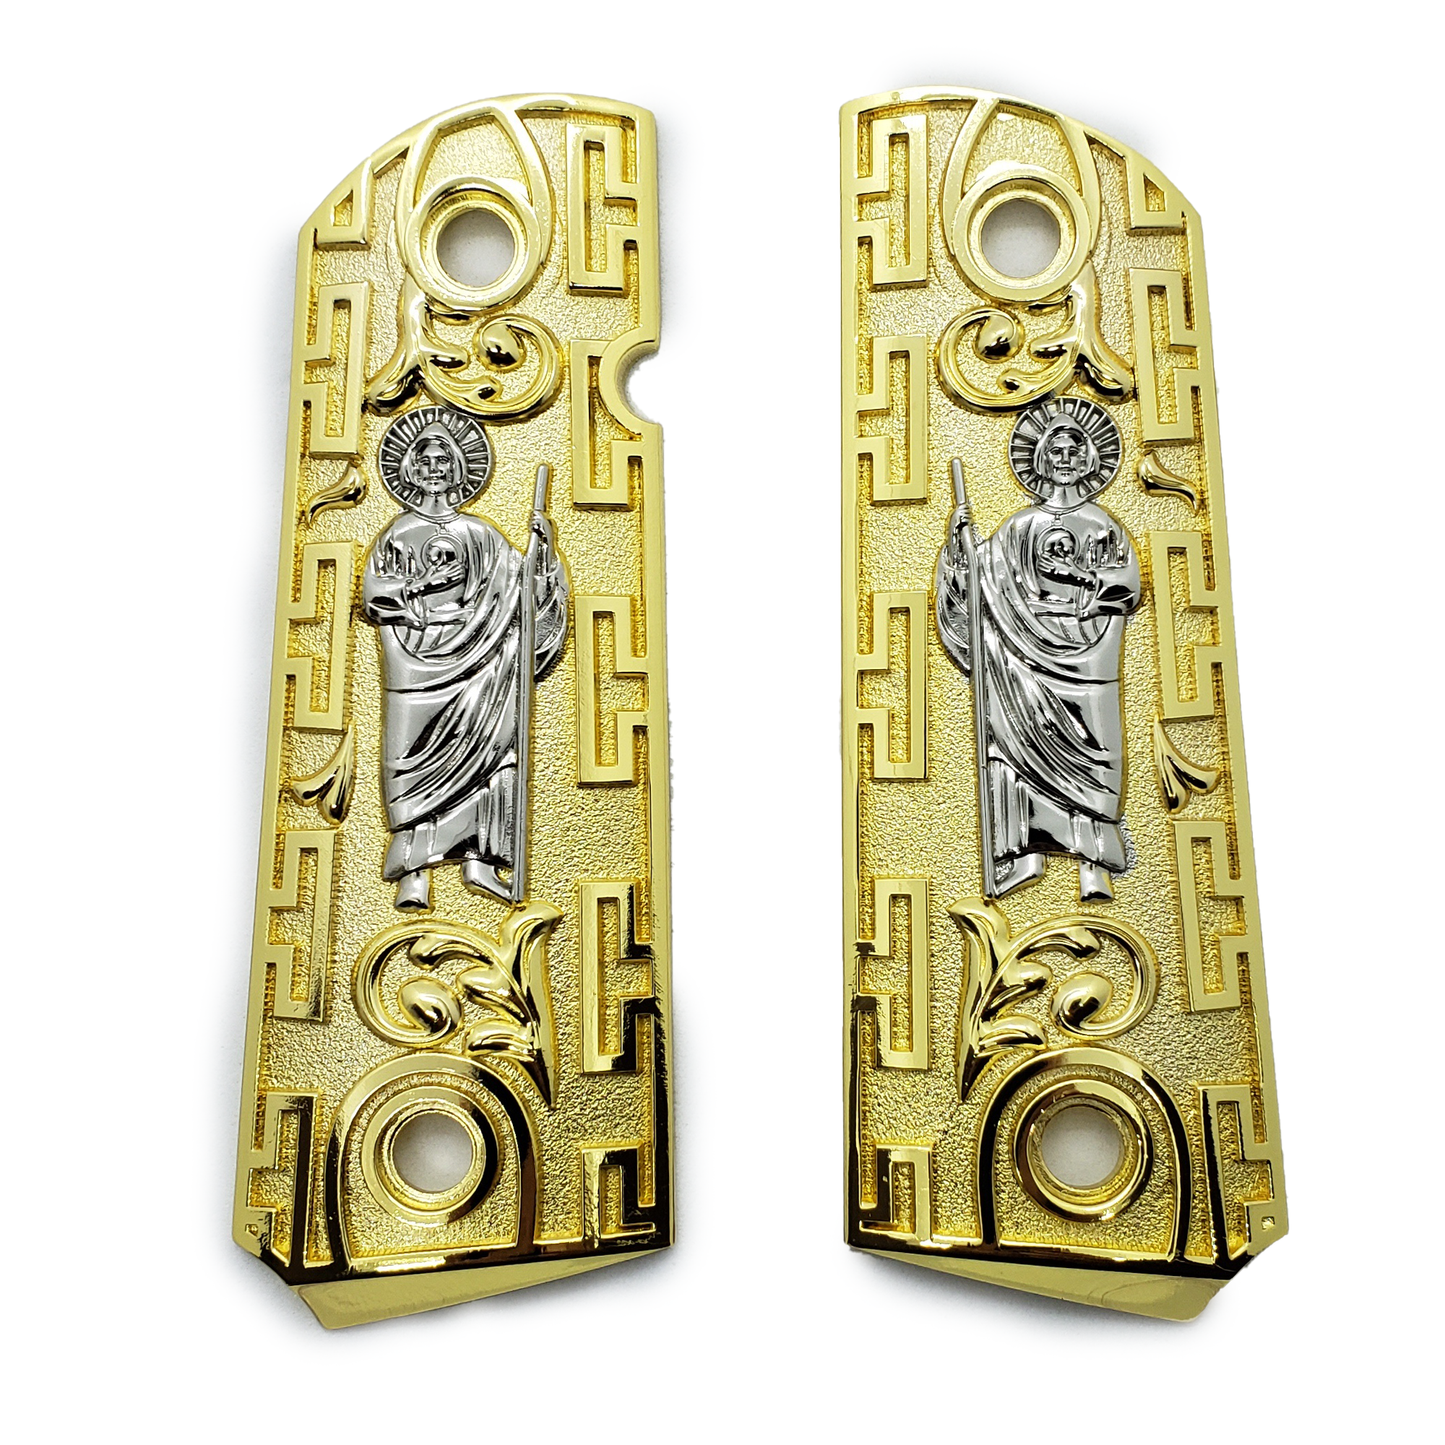 1911 Grips Compact Officer Size  St Jude Grips Gold Nickel